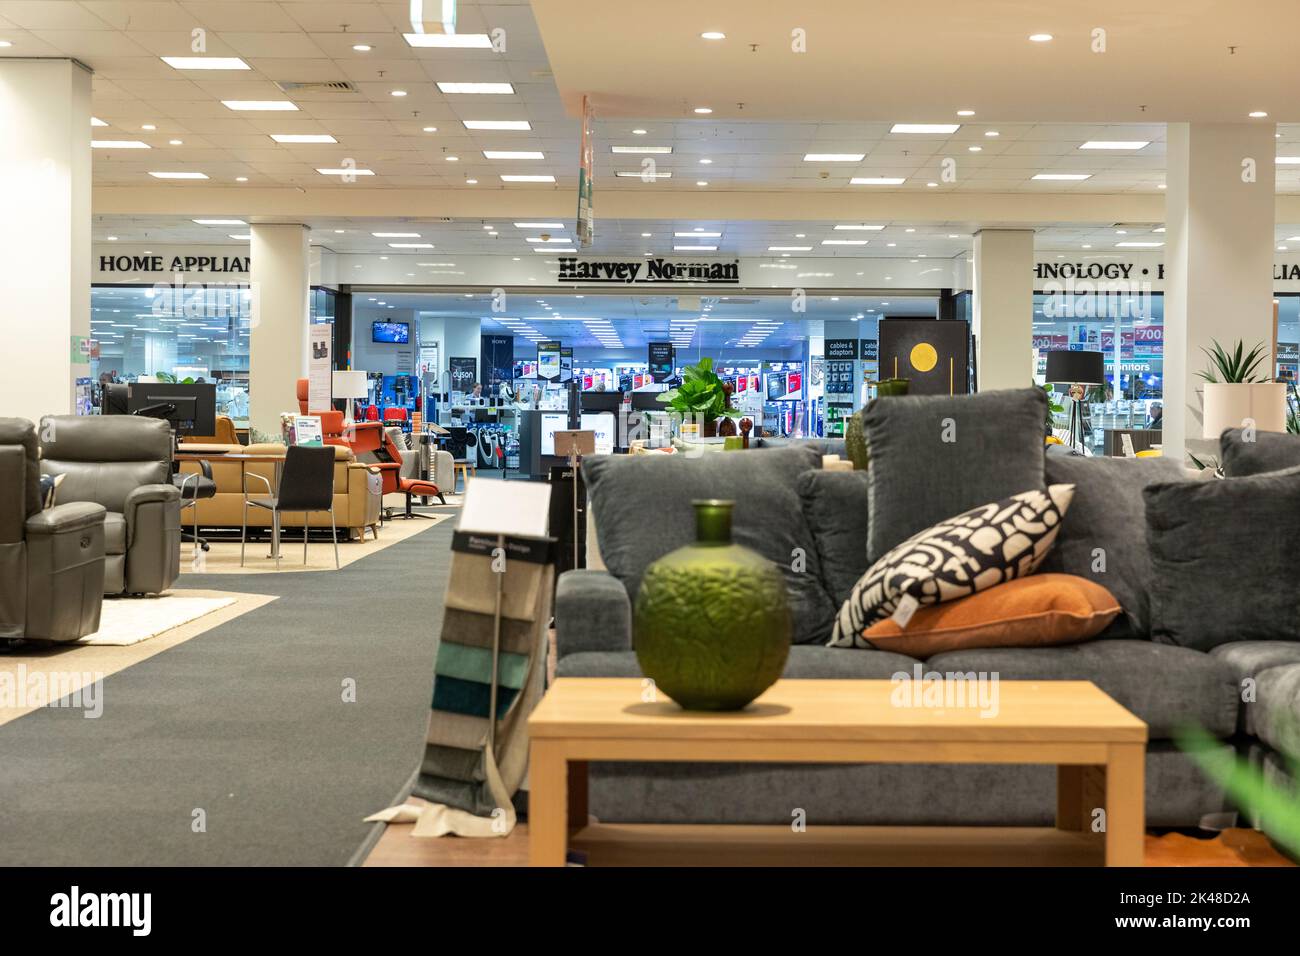 Harvey Norman and Domayne homewares and furniture retailer with home appliances and technology also being sold,Sydney,NSW,Australia Stock Photo